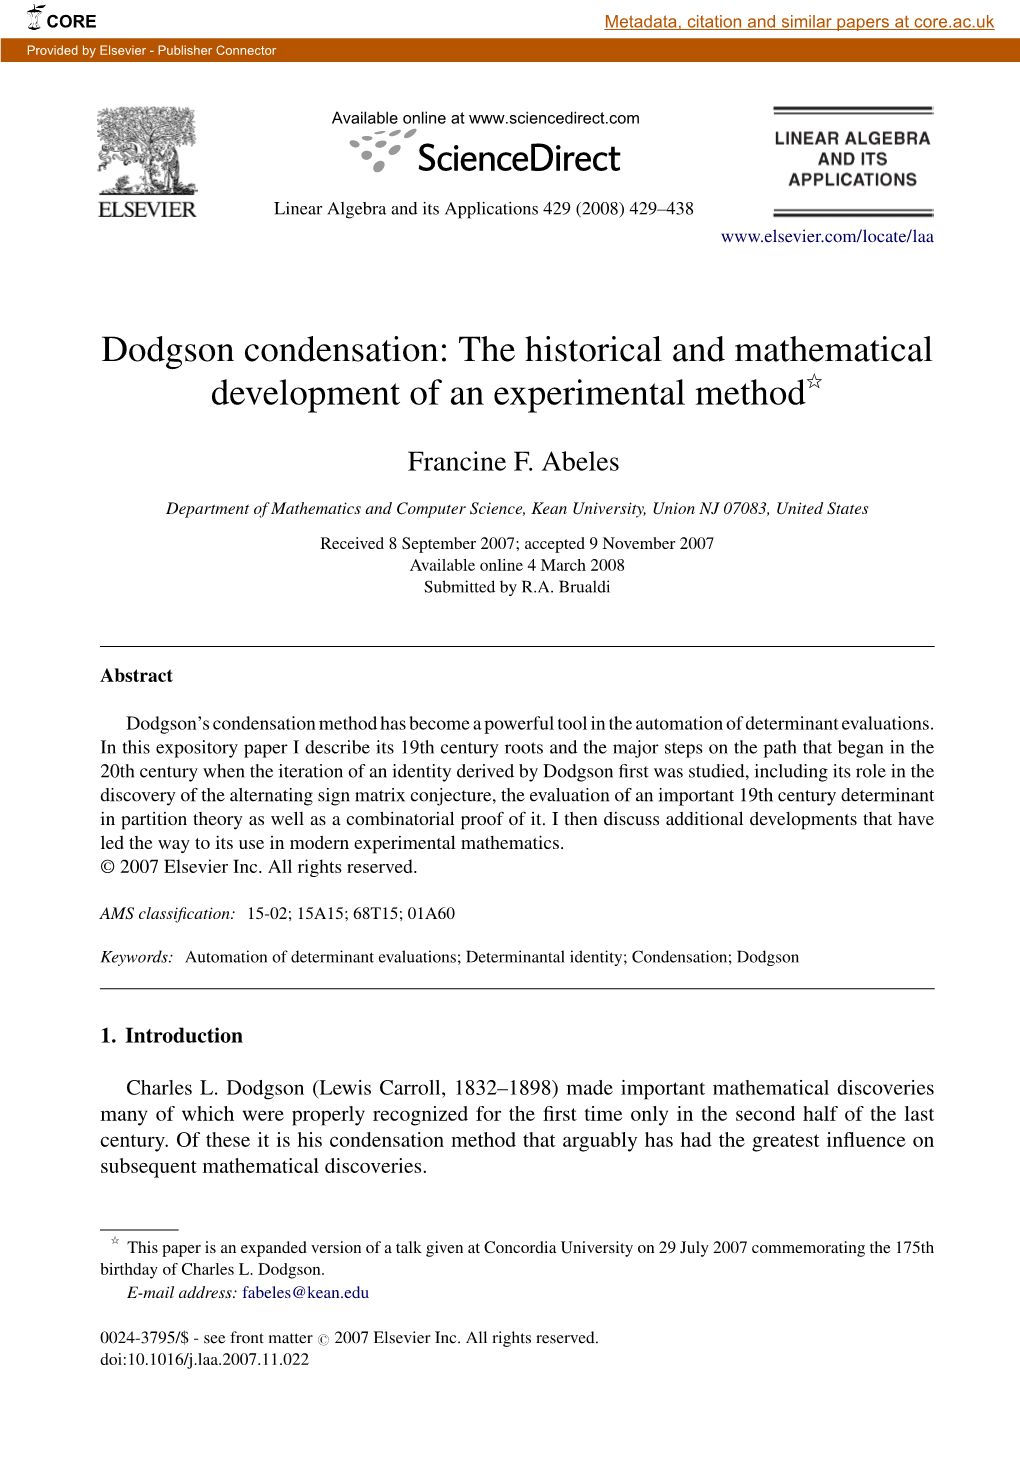 Dodgson Condensation: the Historical and Mathematical Development of an Experimental Methodୋ